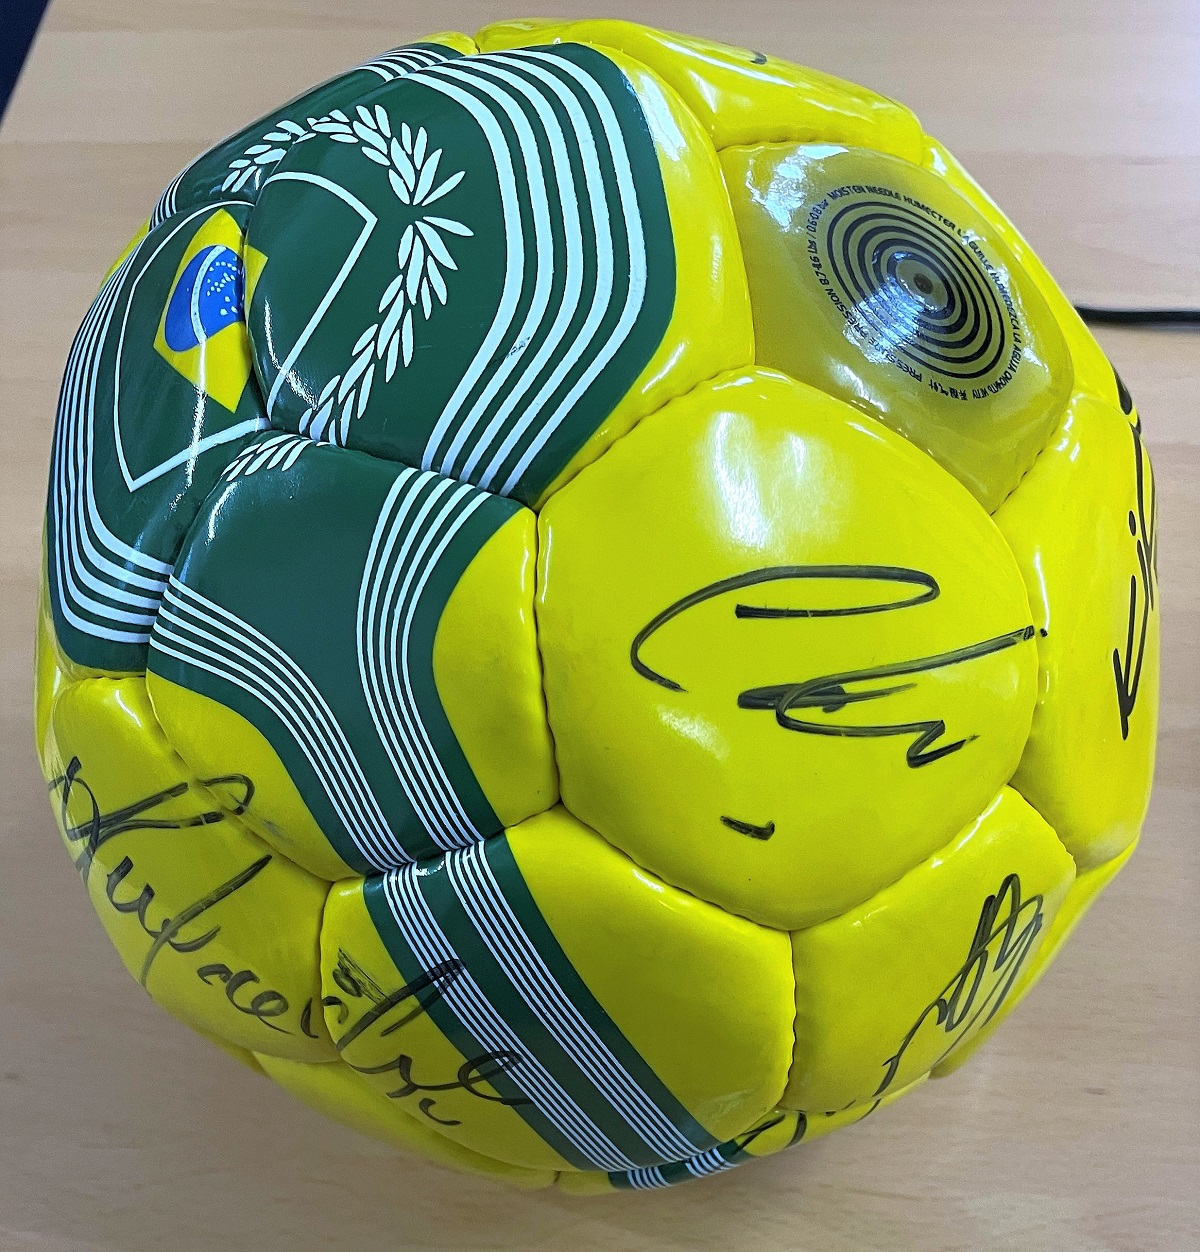 Brazil Legends Multi Signed Size 5 Football Including Cafu. 7 Signatures in total. Yellow/Green/ - Image 2 of 2